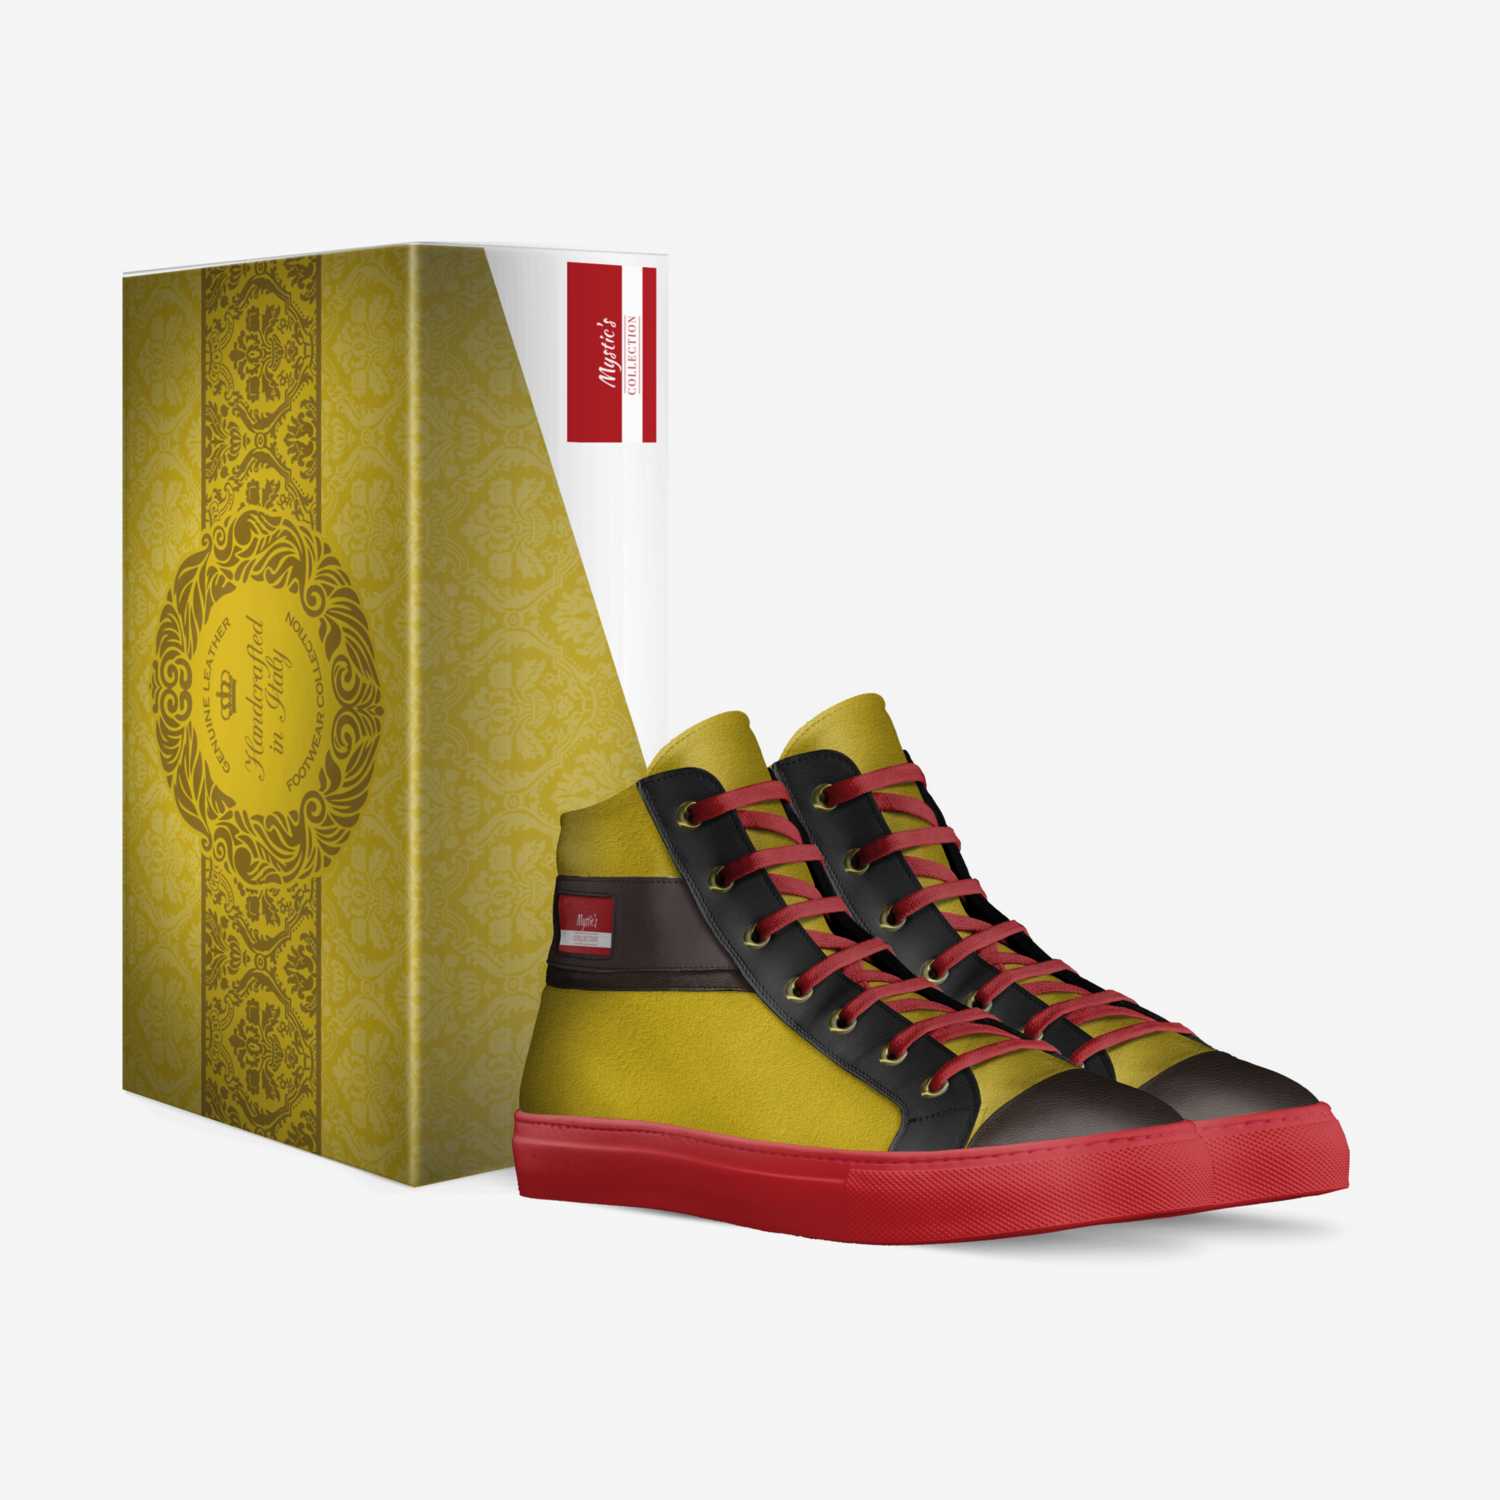 Mystic's custom made in Italy shoes by Mystic Dewayne | Box view